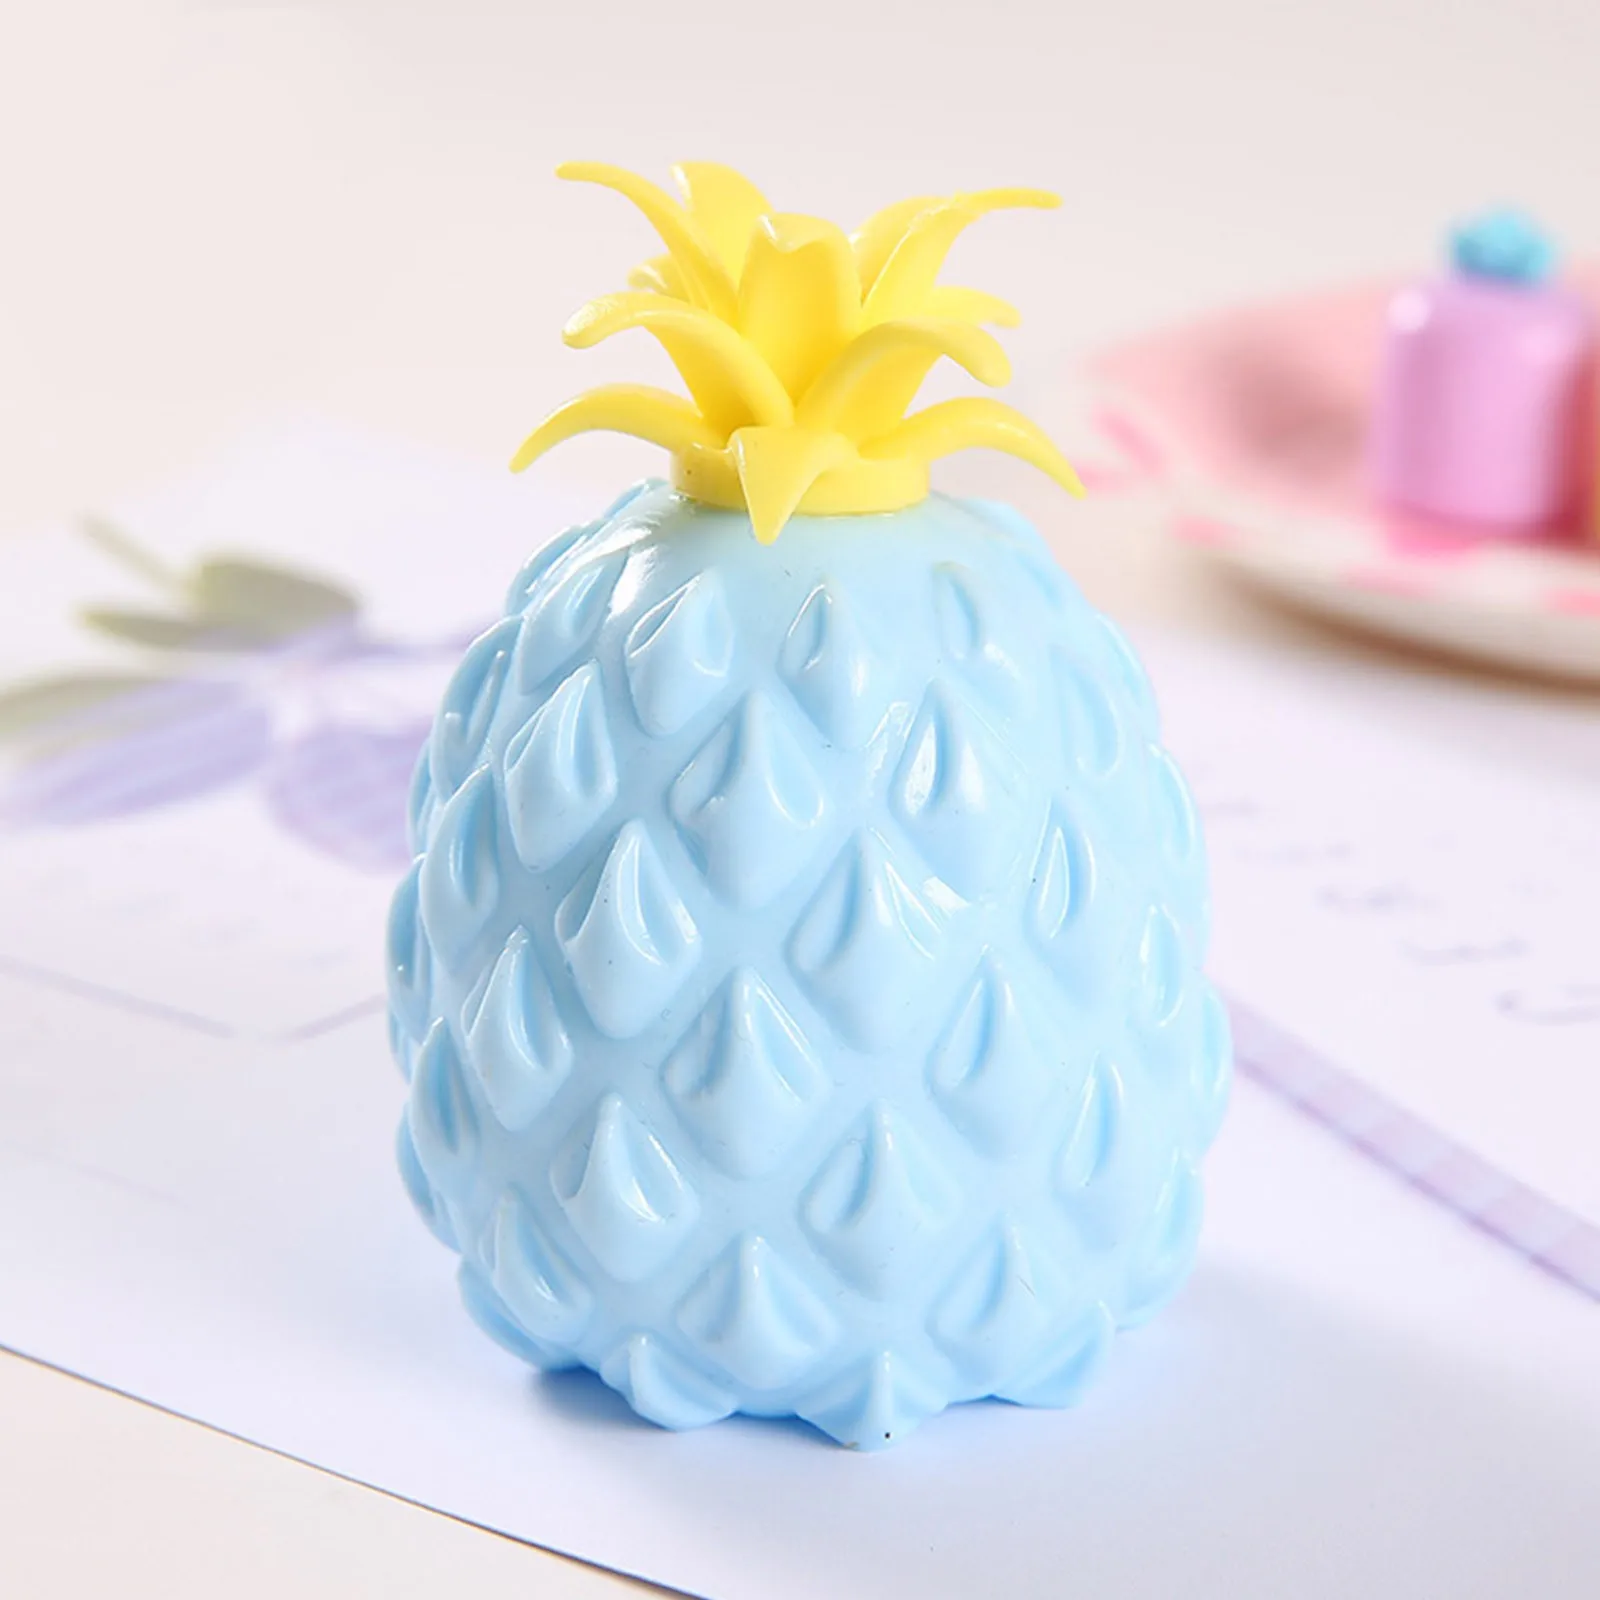 

2021 Soft Pineapple Fidget Toys-stress Squishy Antistress Ball Trend Sensory Figet Toys New Funny Reliever For Kids/adult Gift